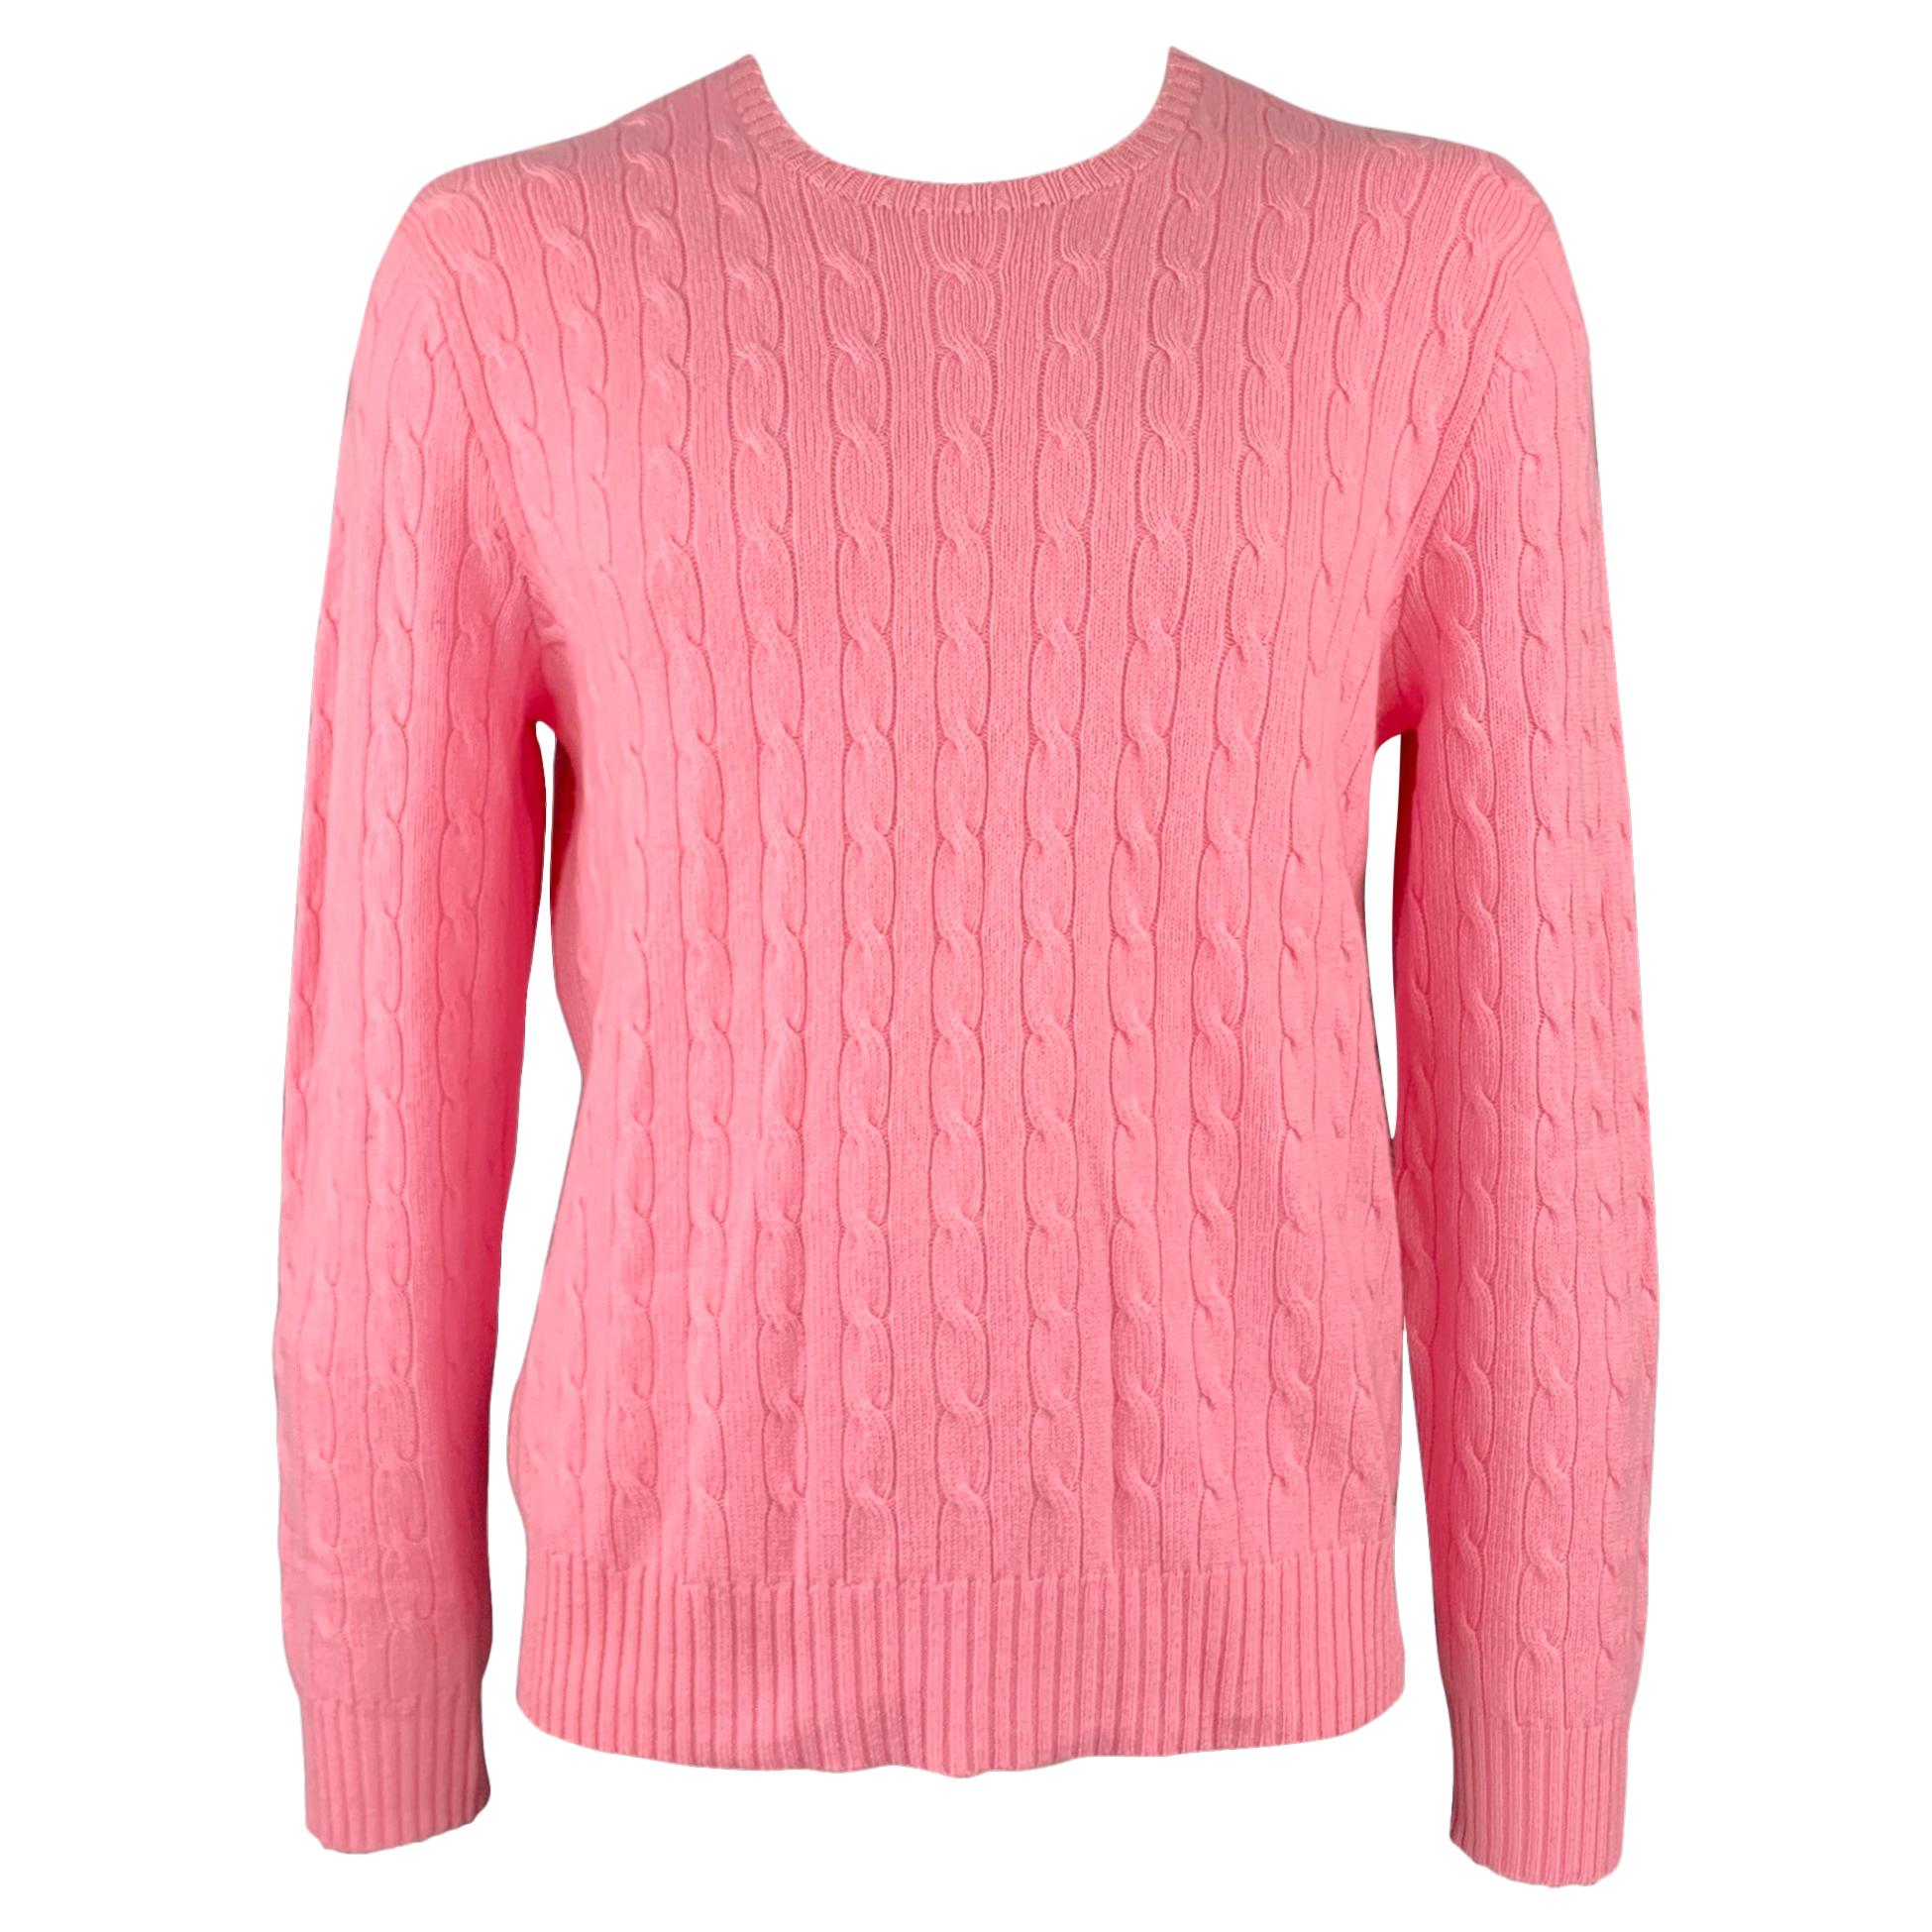 POLO by RALPH LAUREN Size XXL Pink Cable Knit Cashmere Crew-Neck Sweater